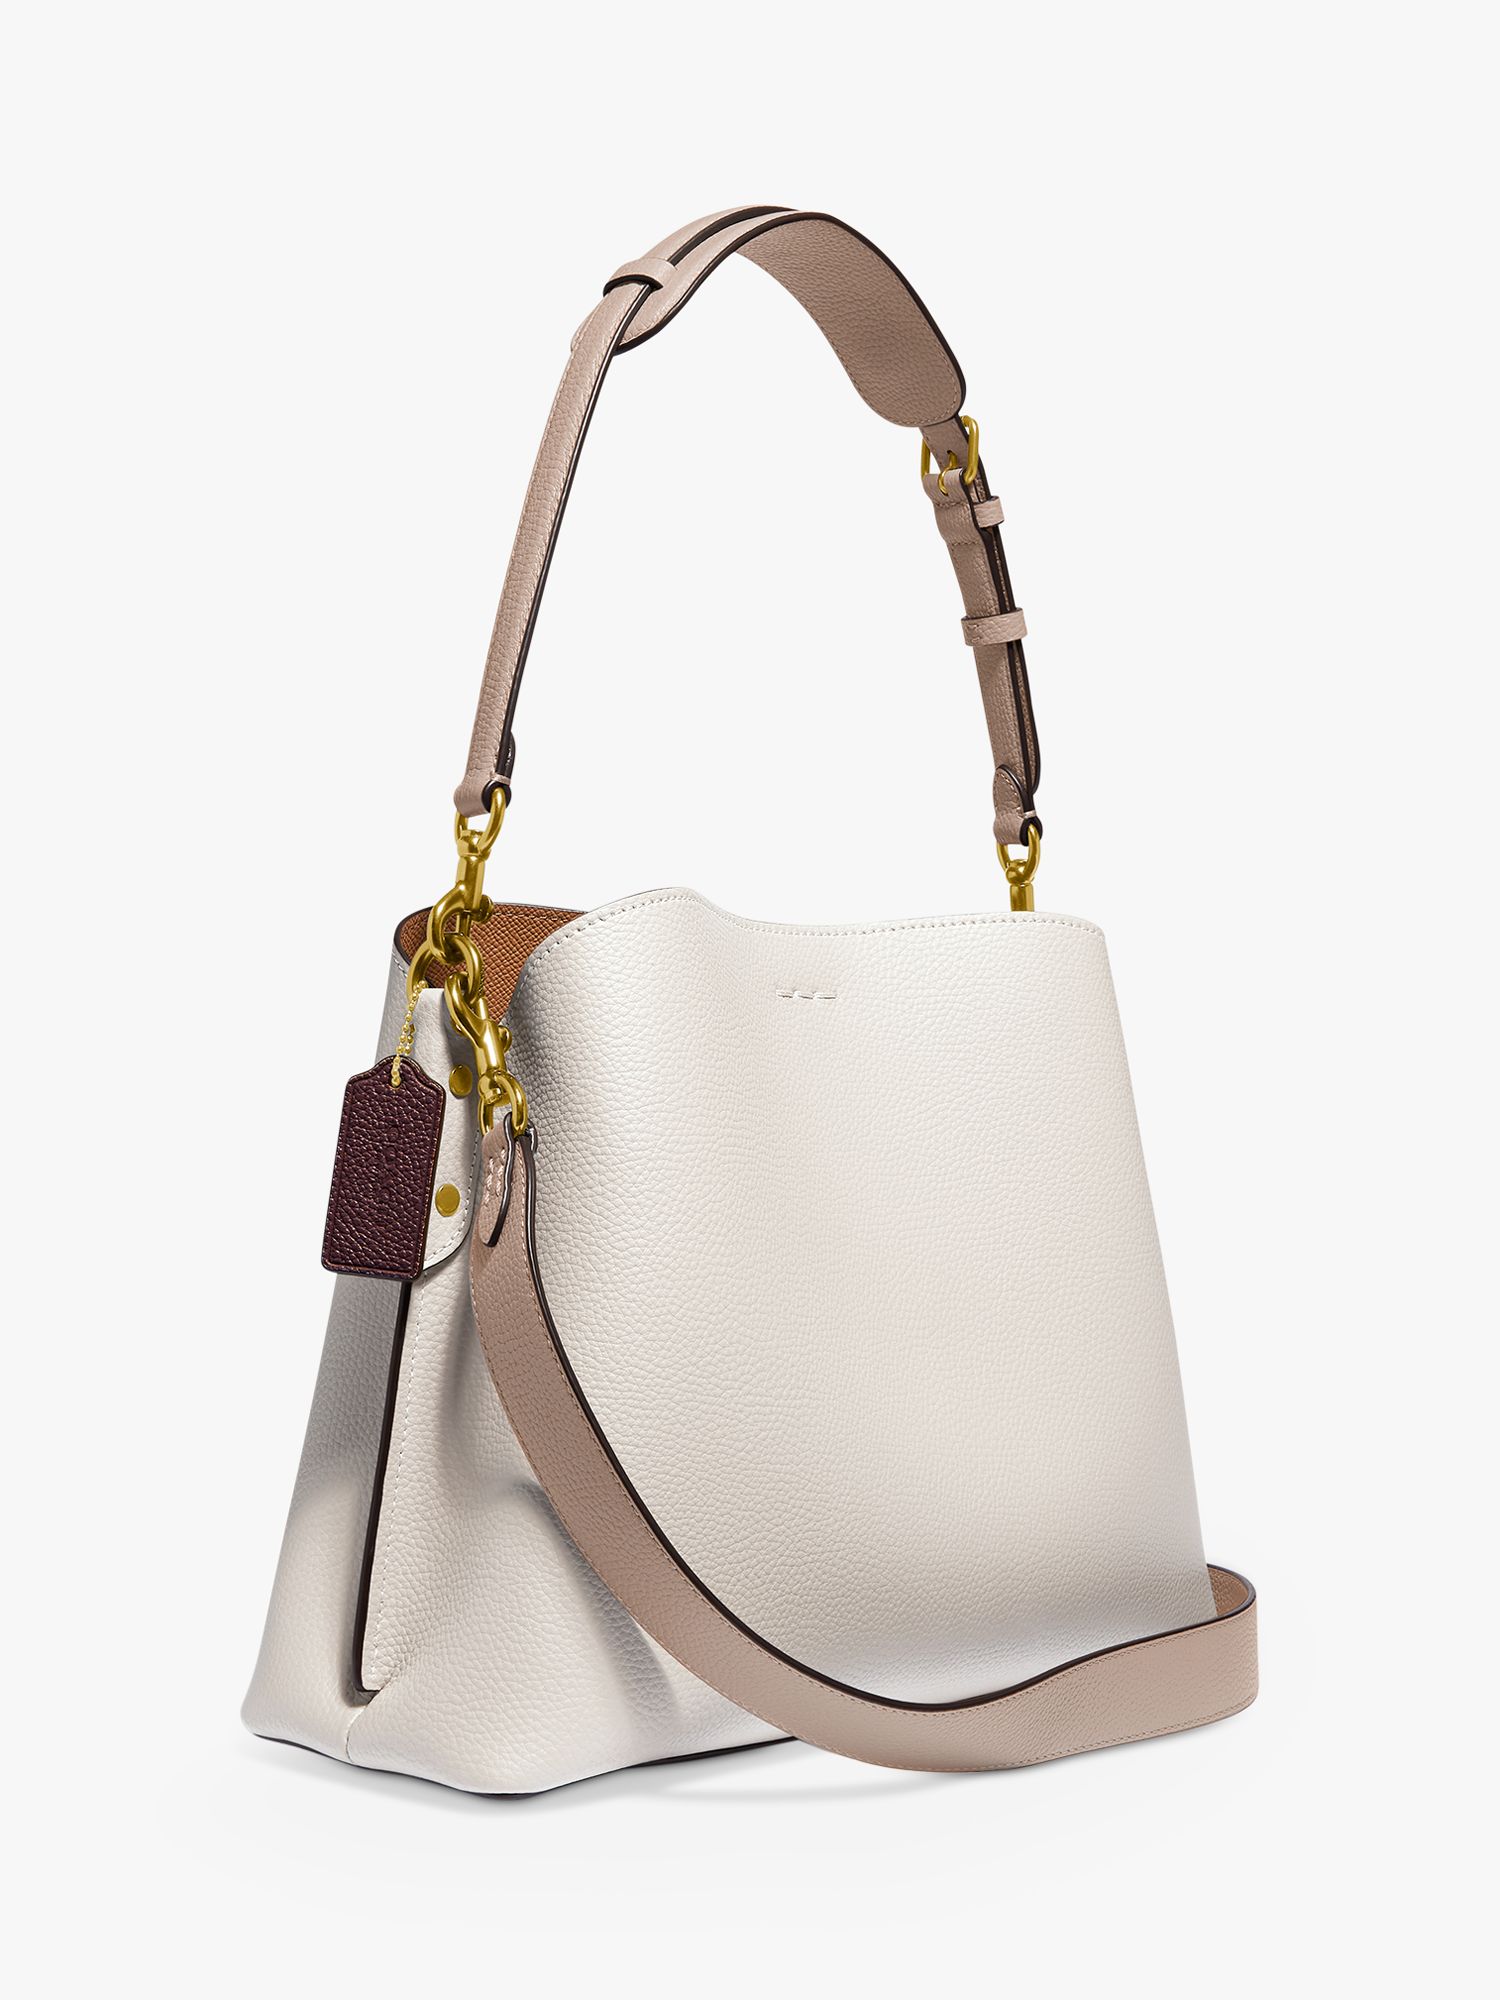 Coach Willow Leather Shoulder Bag, Chalk at John Lewis & Partners